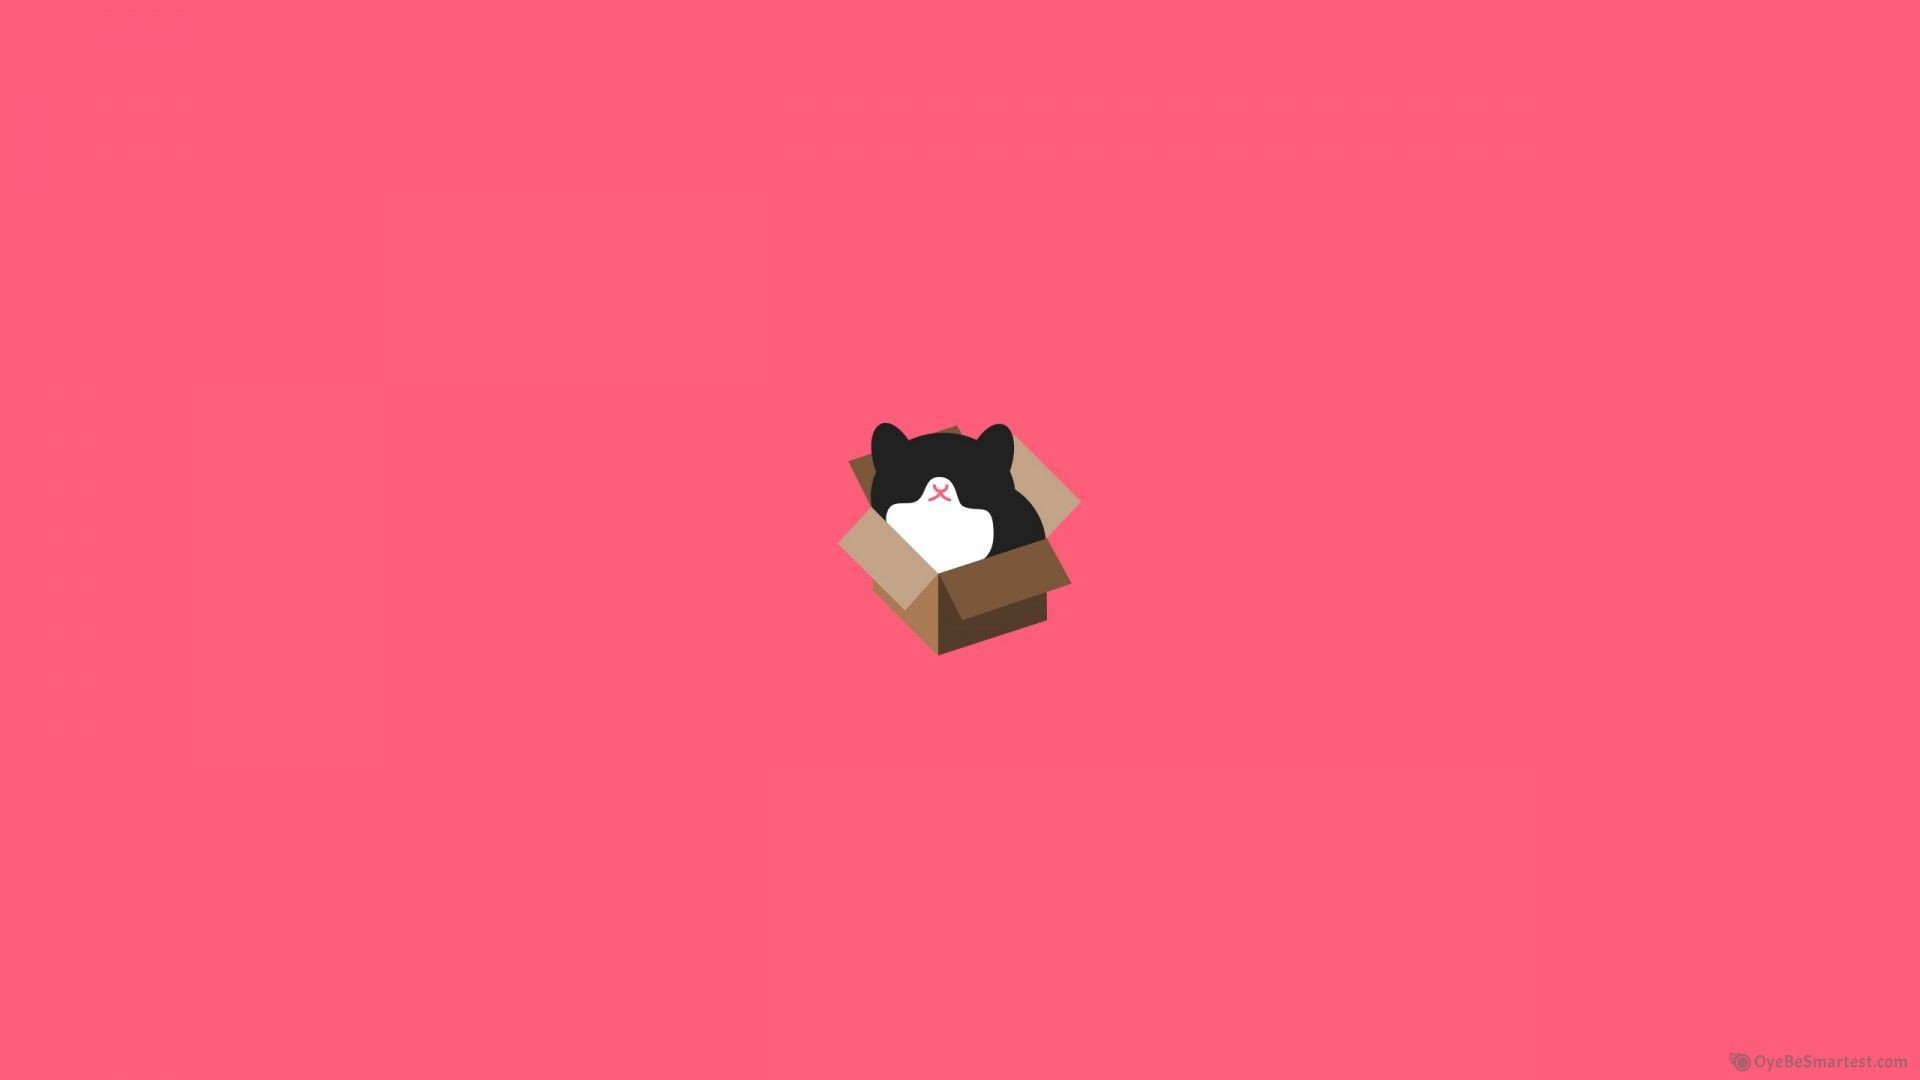 Minimalistic wallpaper of a cat in a box on a pink background - Cat